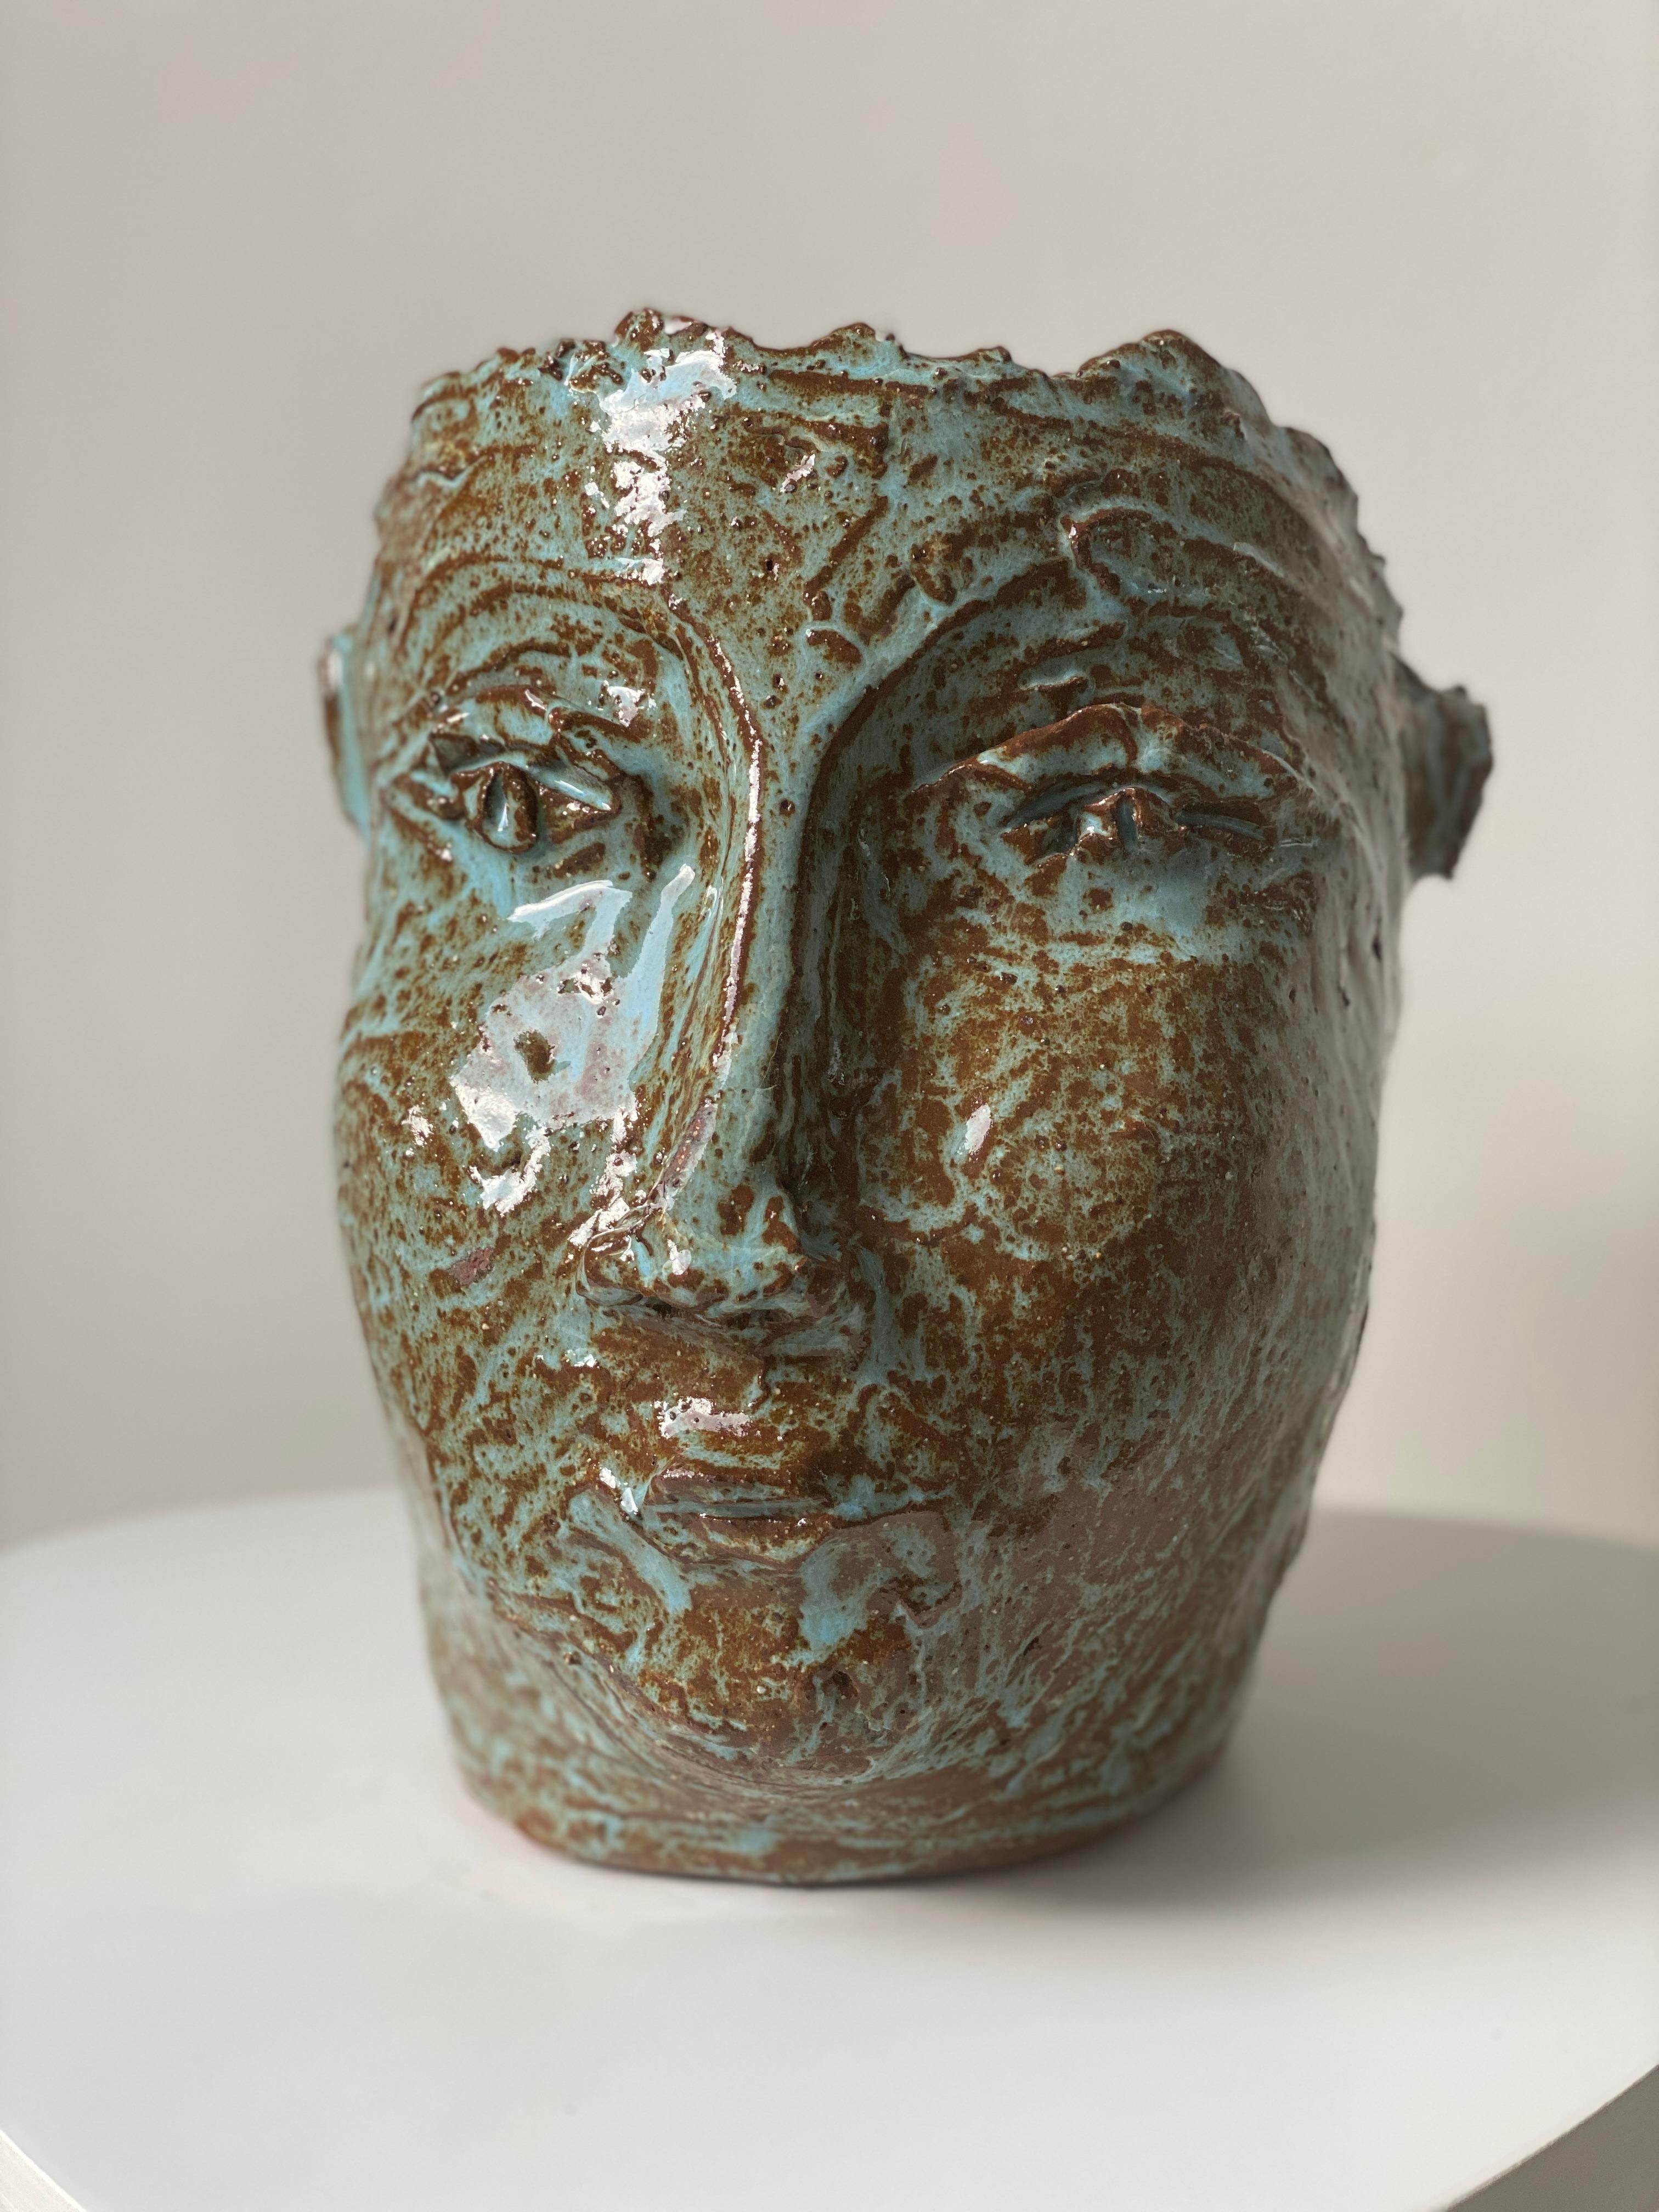 Kathleen Rhee Figurative Sculpture - Turquoise sienna rustic wabi sabi hand sculpted glazed clay face vessel ancient 